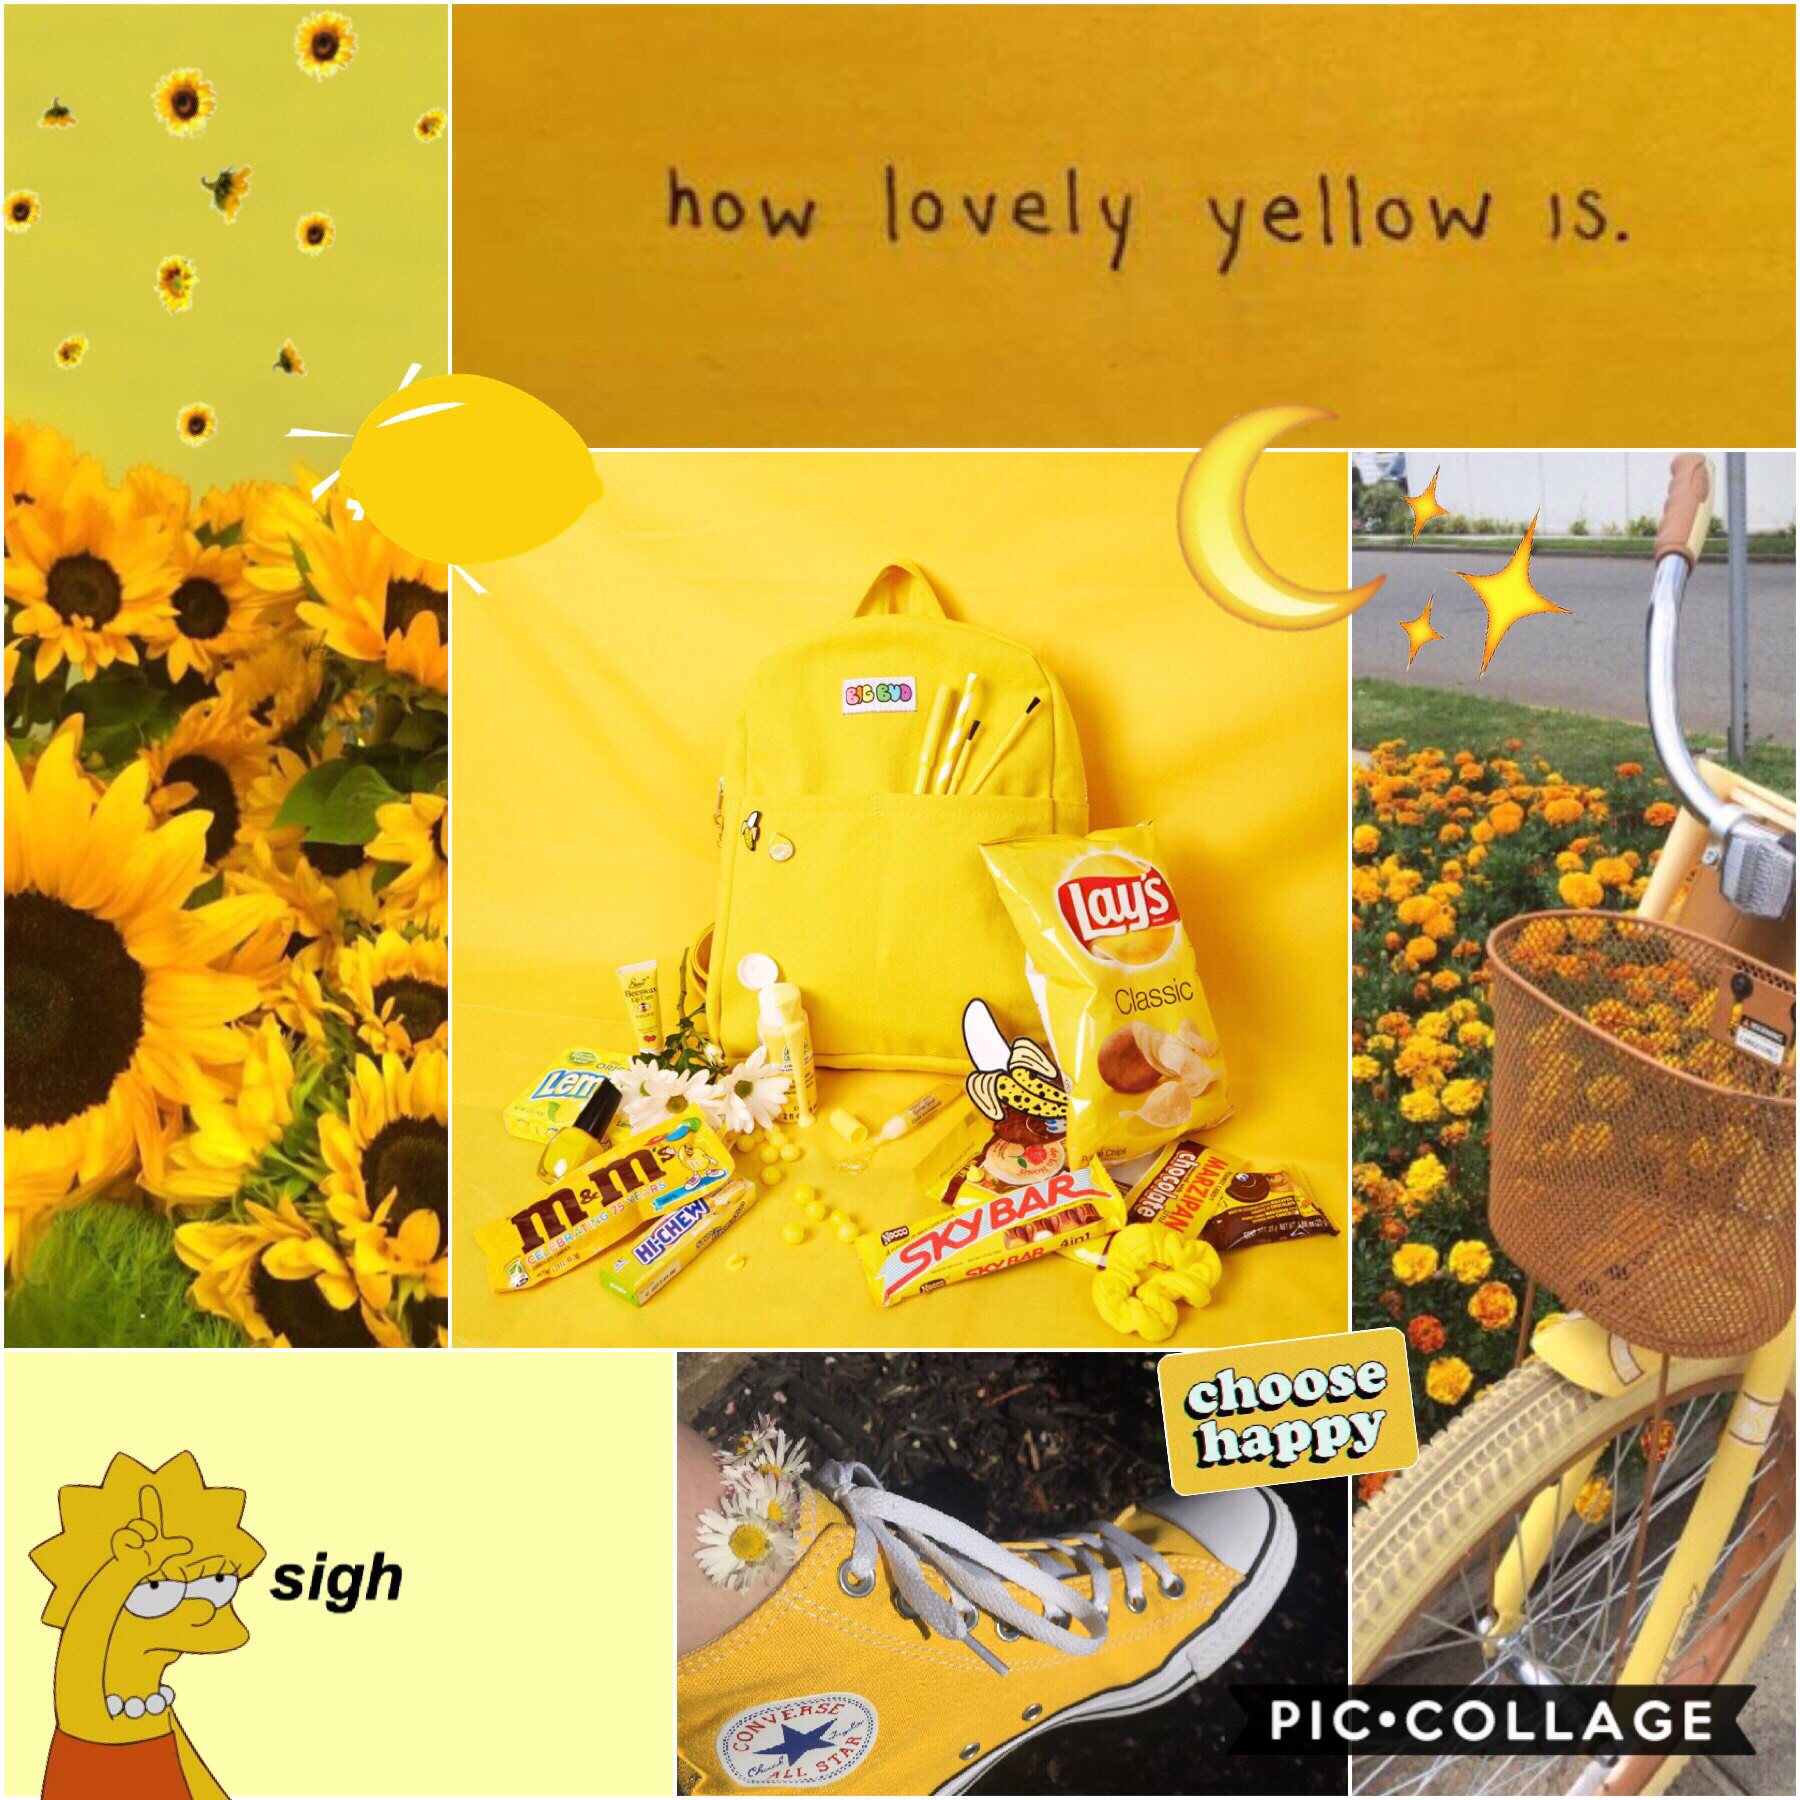 ✨🌙 yellow is very aesthetically pleasing💫☀️